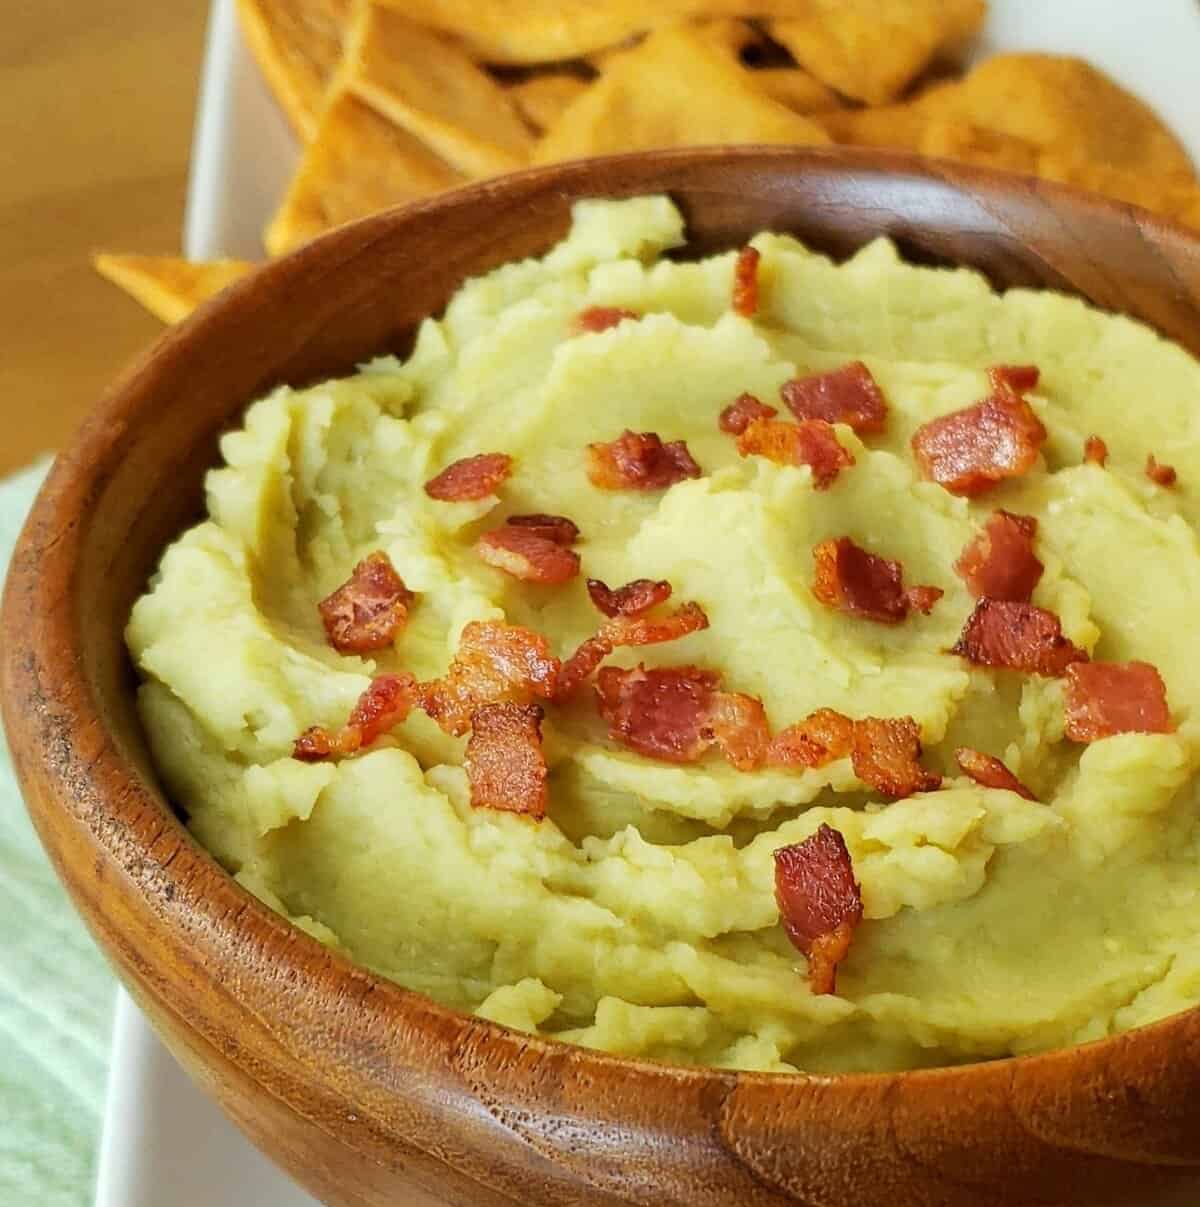 Wooden bowl of lima bean dip with bacon sprinkled on top and pita chips in background.